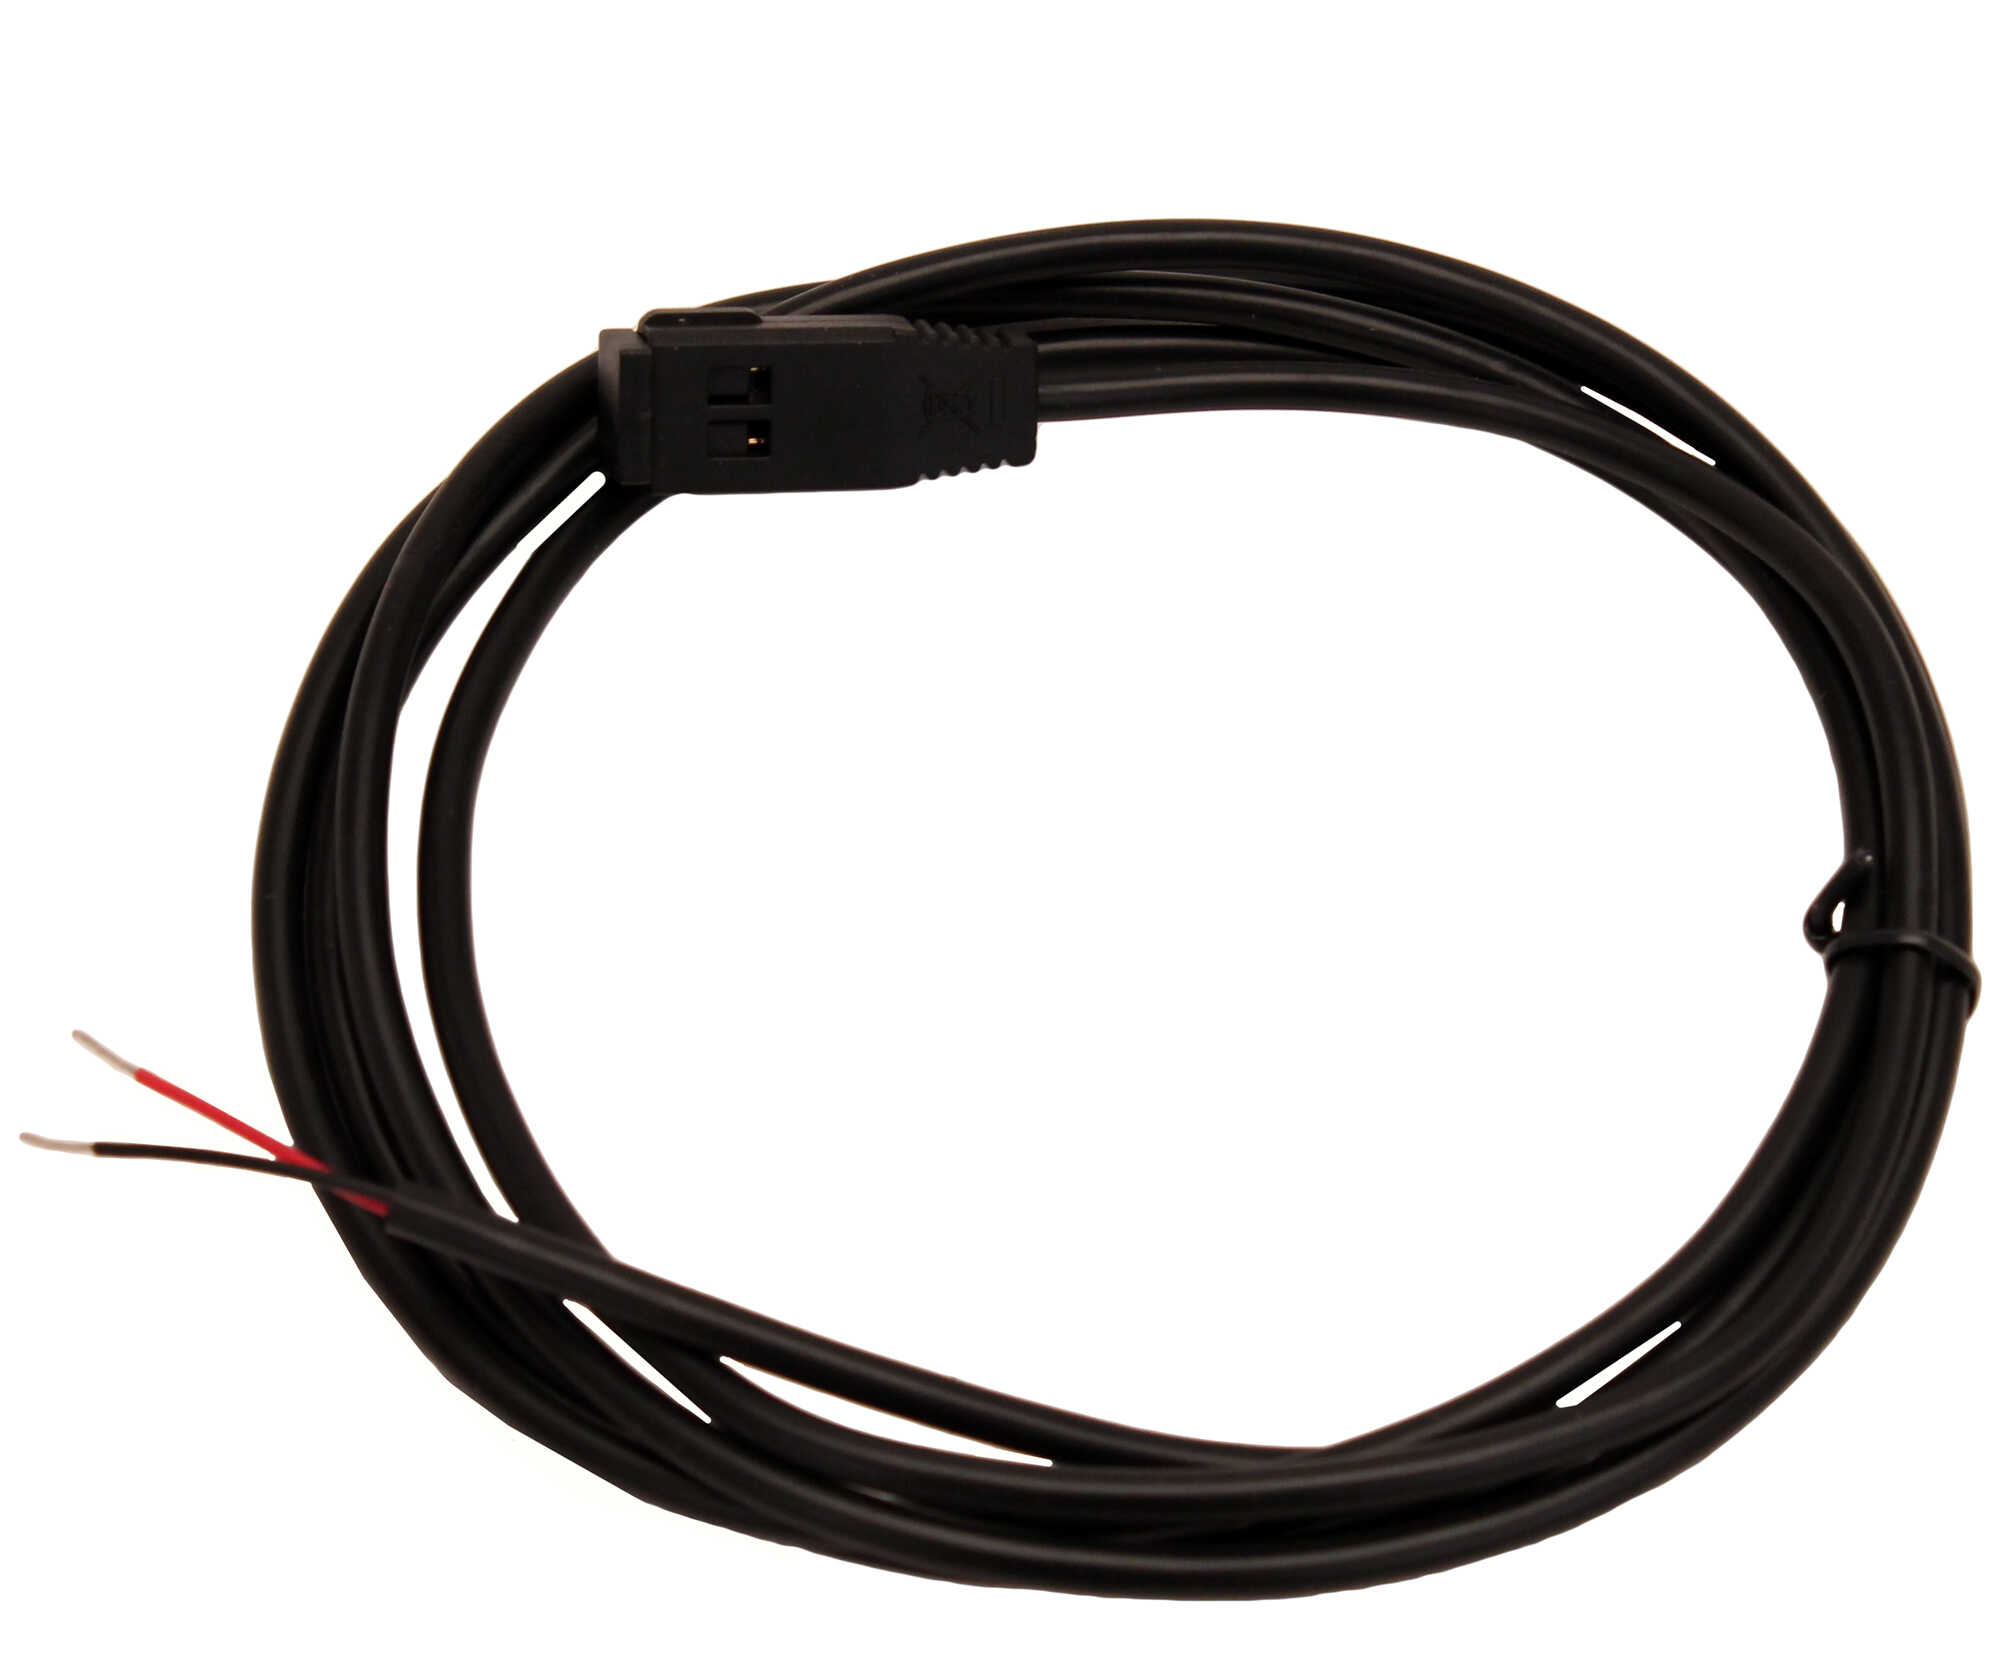 Humminbird Transducer Power Cable 6 Ft Pc 10 720002-1